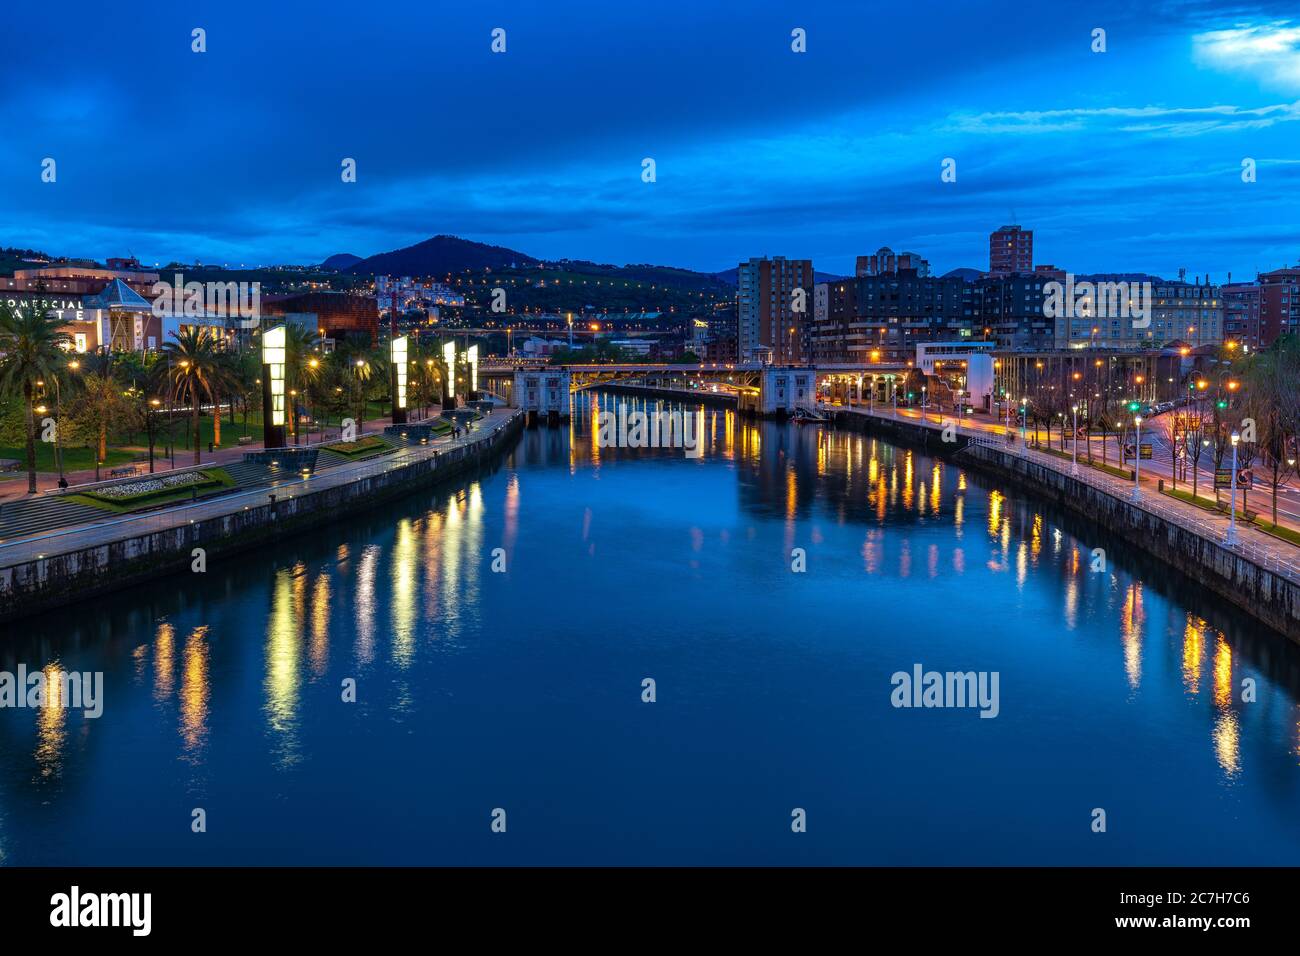 Europe, Spain, Basque Country, Vizcaya Province, Bilbao, view from the Pedro Arrupe Bridge over the Nervión and Bilbao at the blue hour Stock Photo